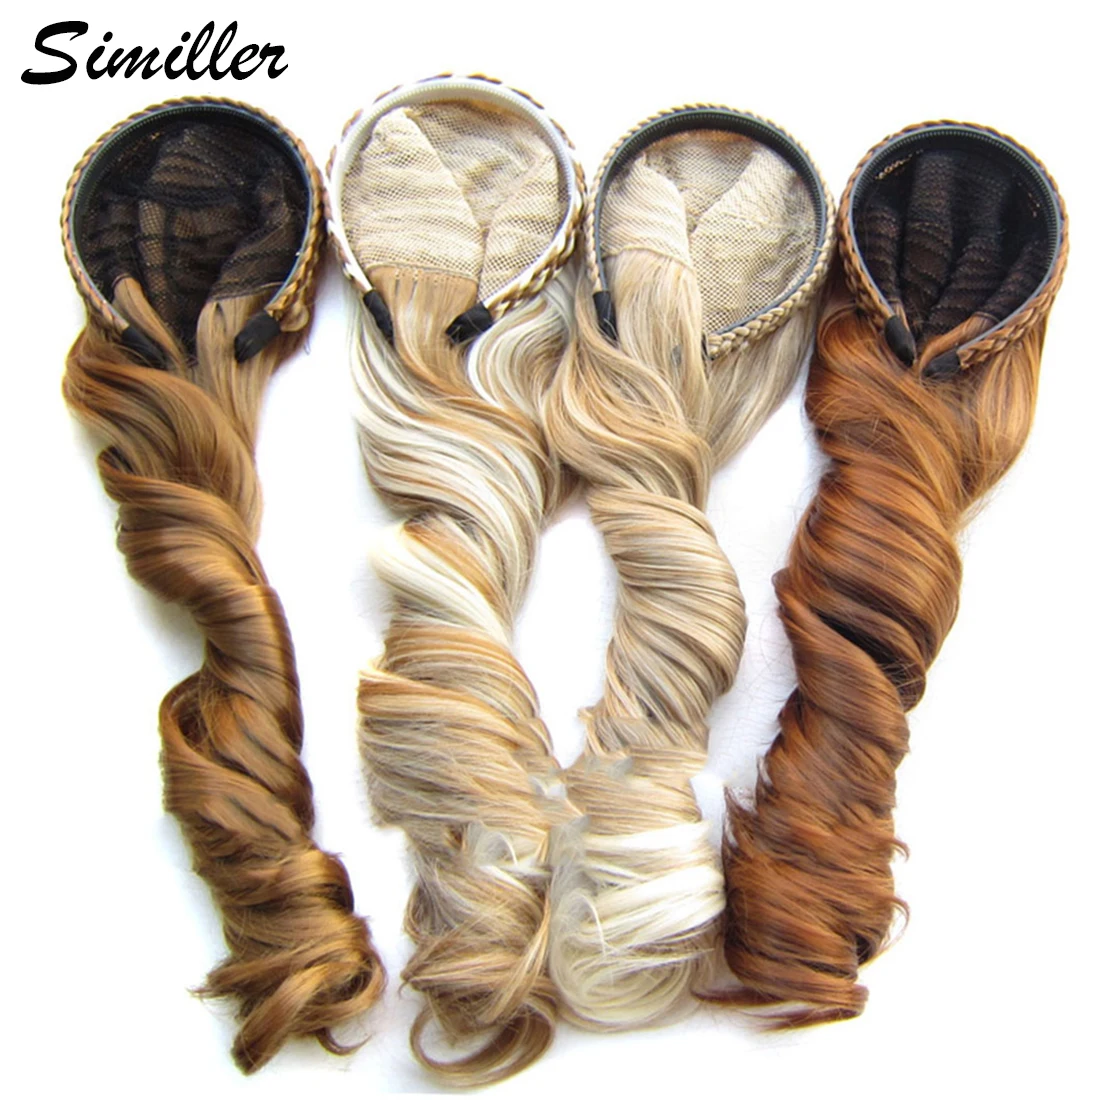 Similler Long Wavy Ombre Synthetic Hair Half Wigs For Women Heat Resistant Fiber Afro 18 Style For Available Mix Colors Ombre